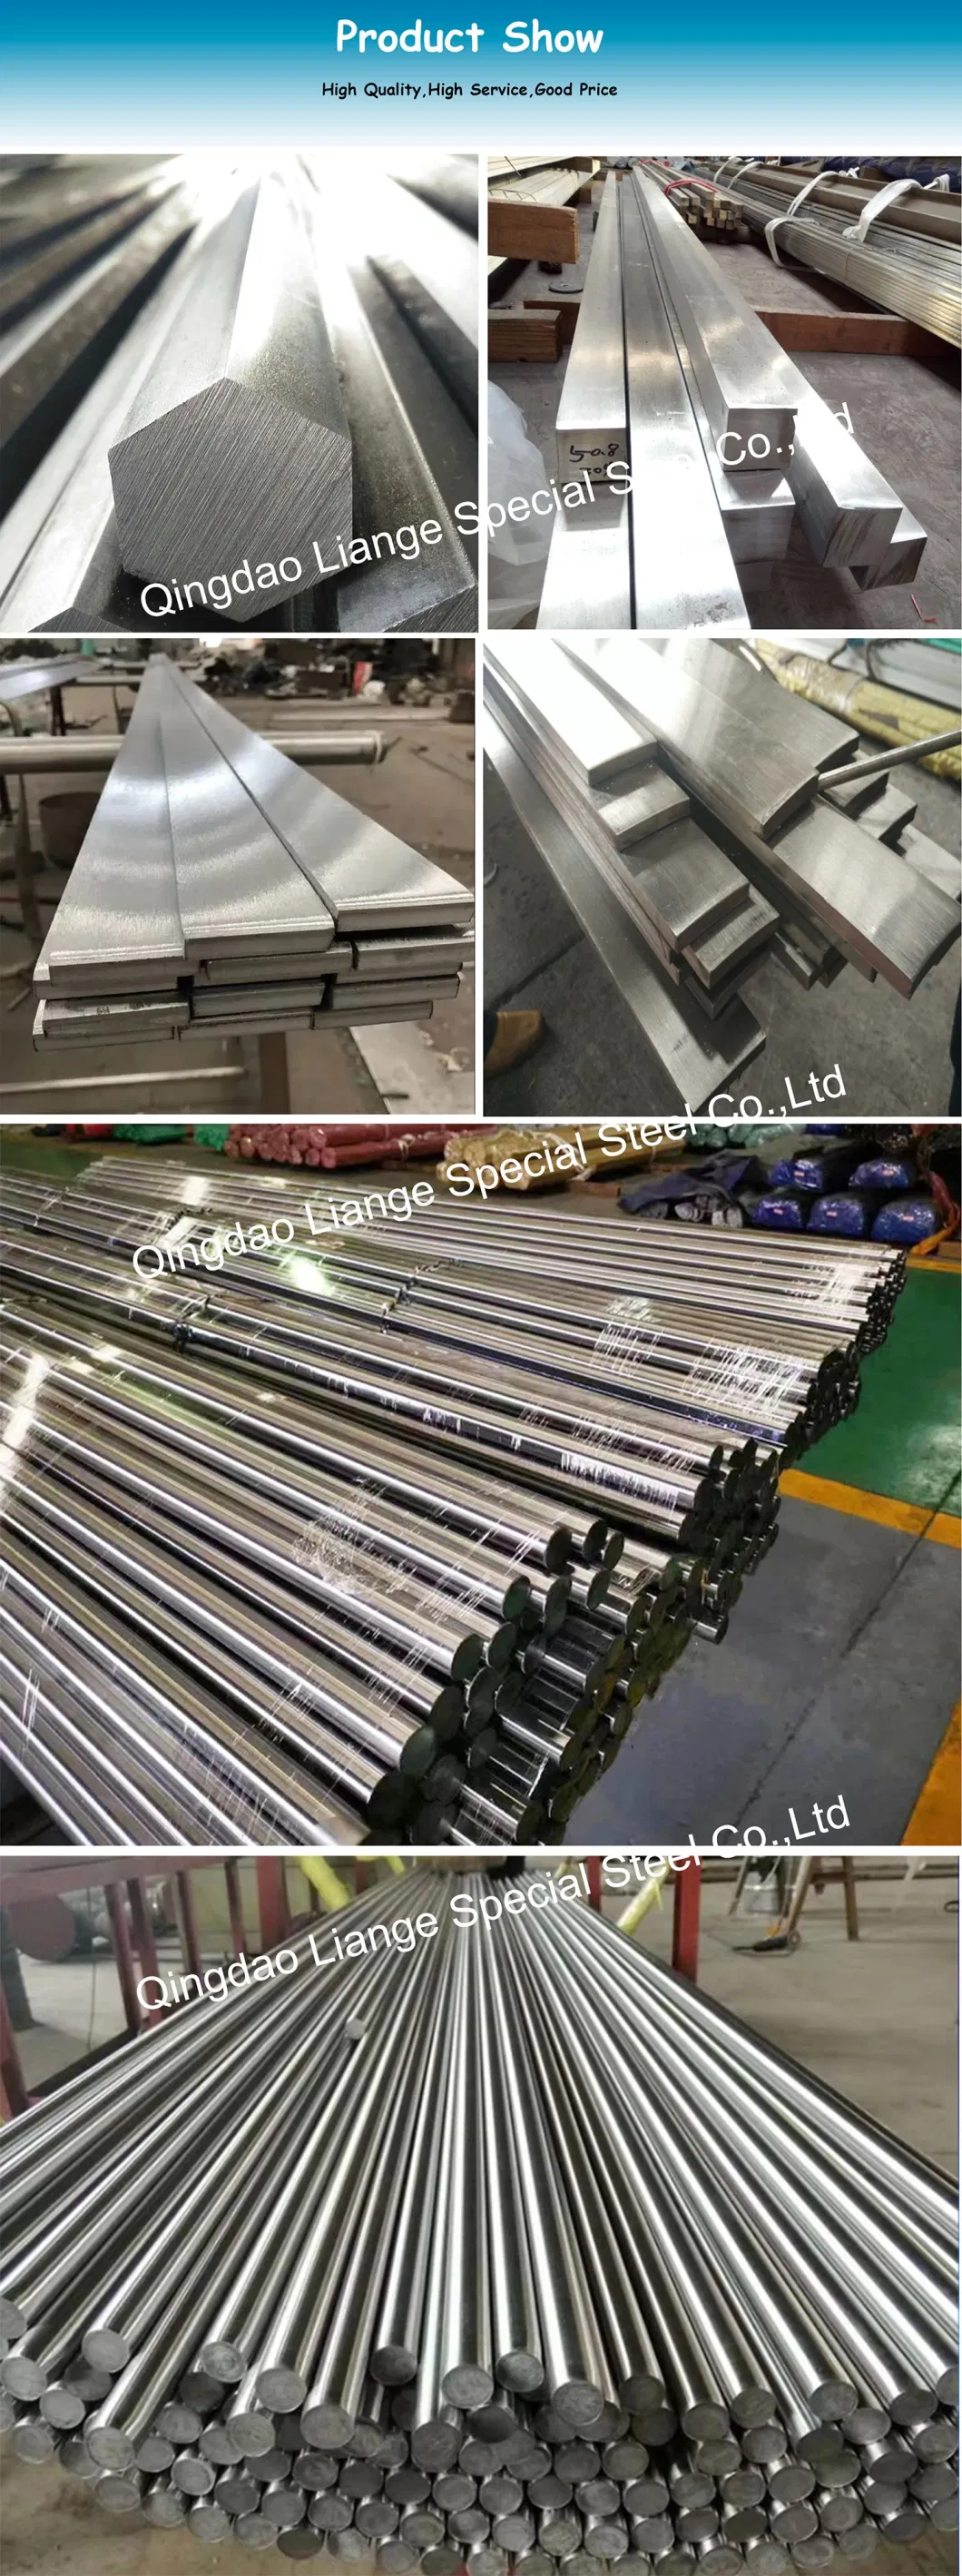 ASTM A582 S41600 416 SUS416 X12crs13 1.4005 Y12Cr13 Grinding Polishing Free Cutting Stainless Steel Bar